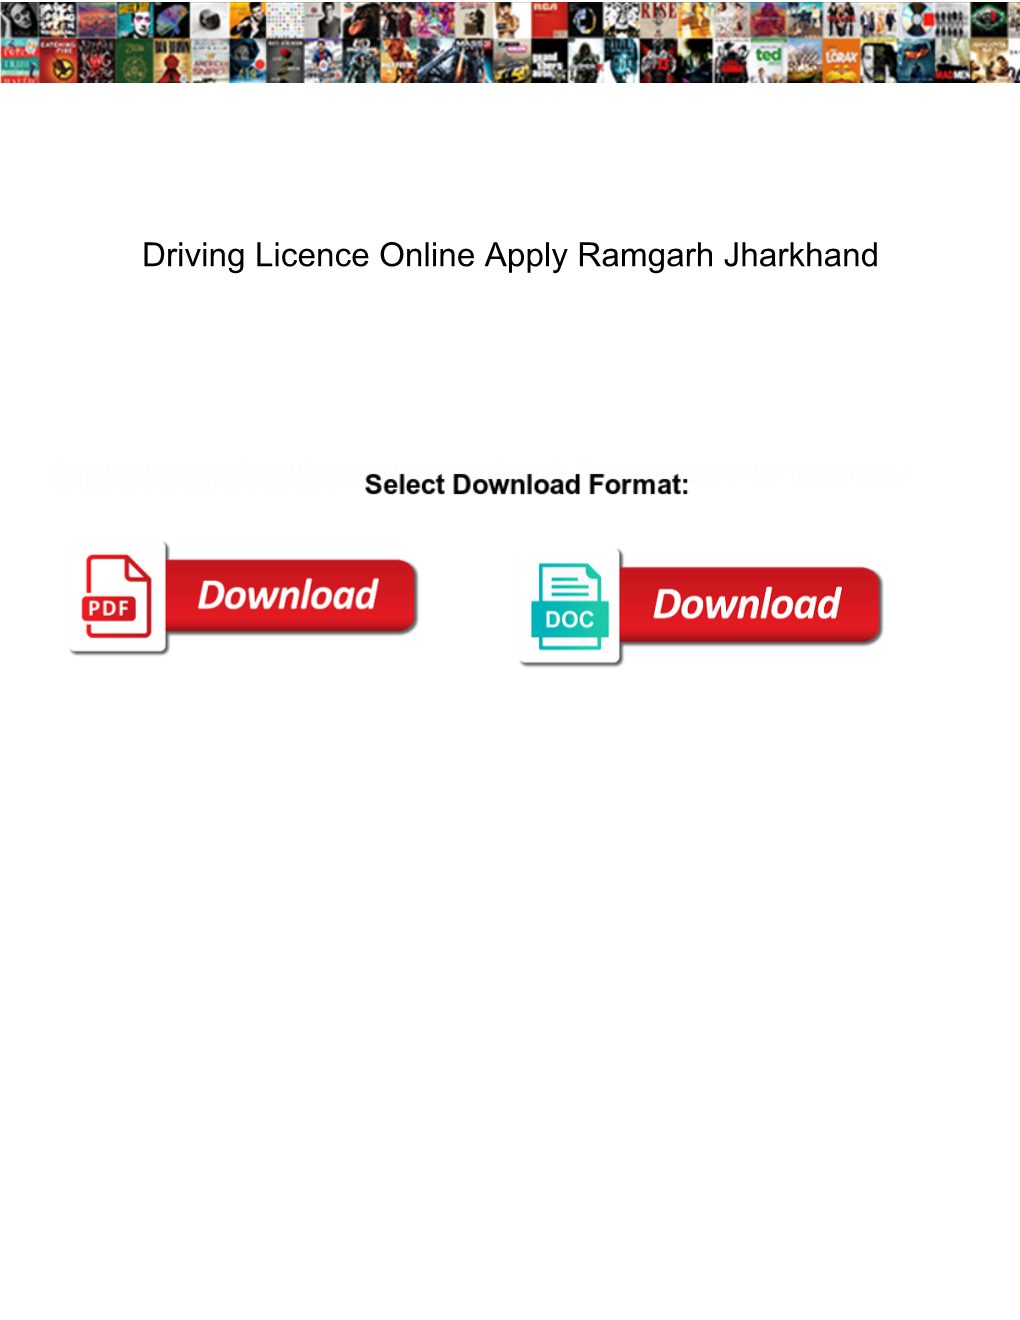 Driving Licence Online Apply Ramgarh Jharkhand